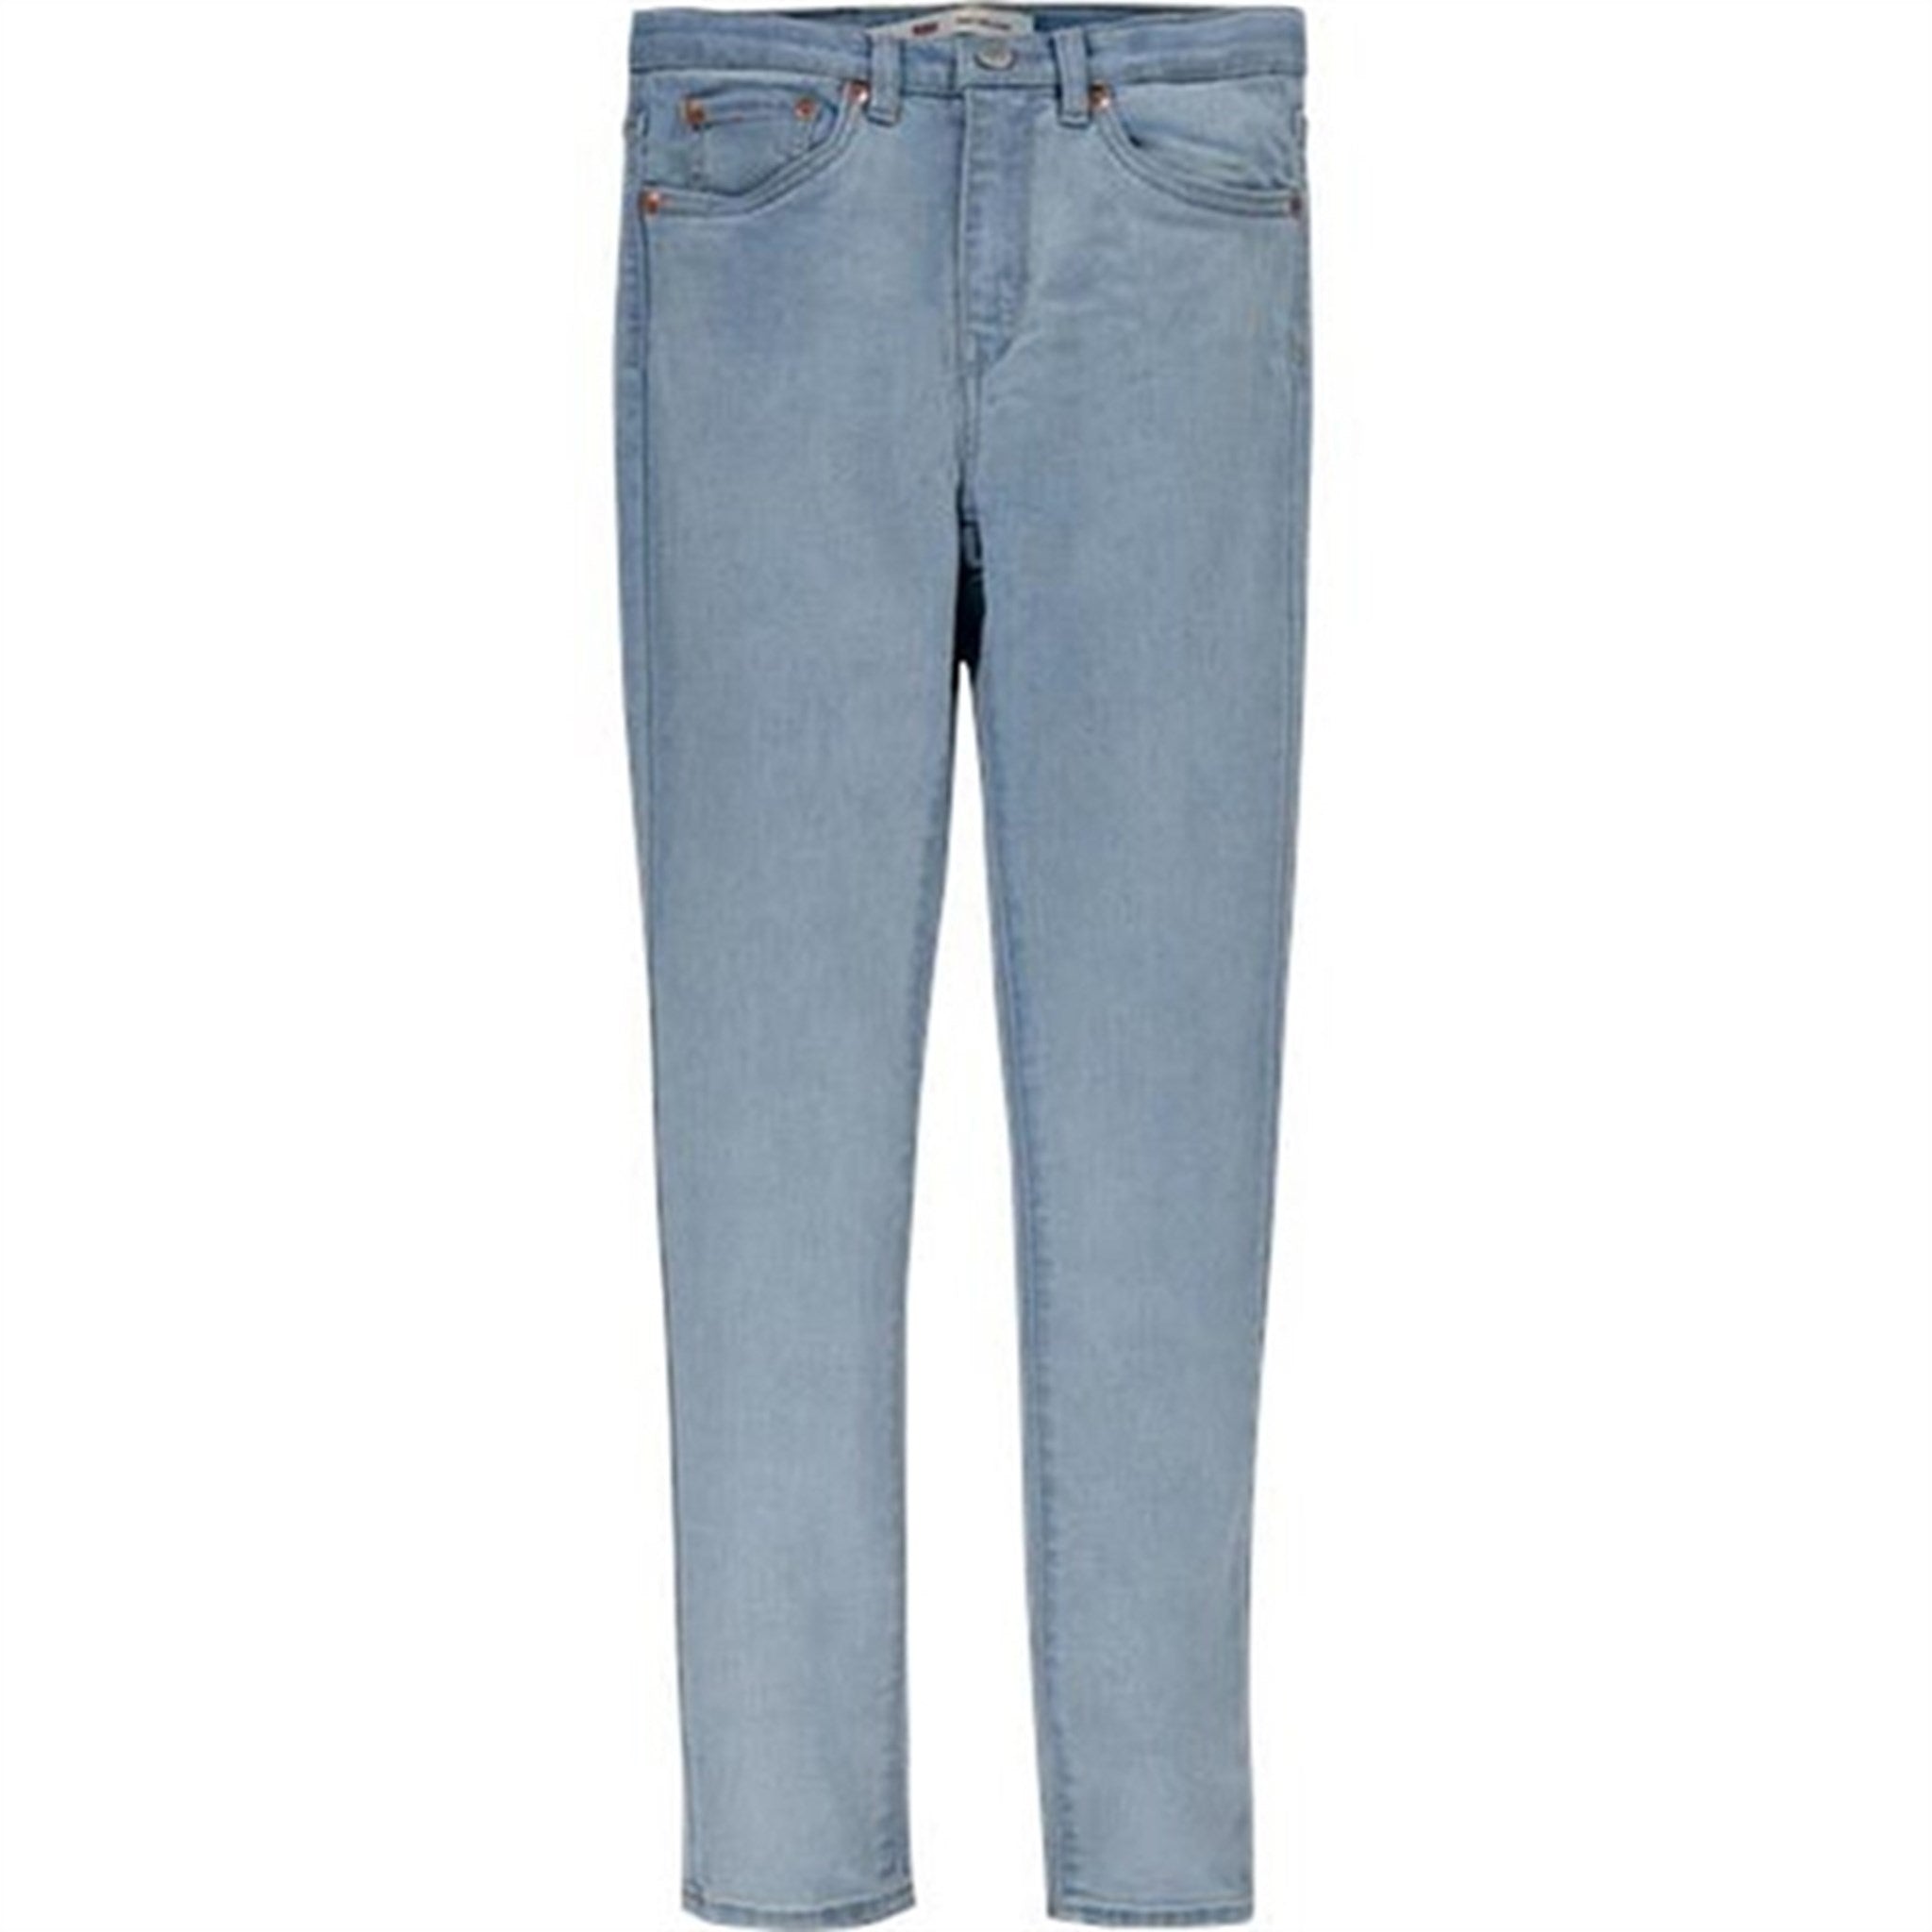 Levi's 720 High Rise Super Skinny Jeans French Prince 2